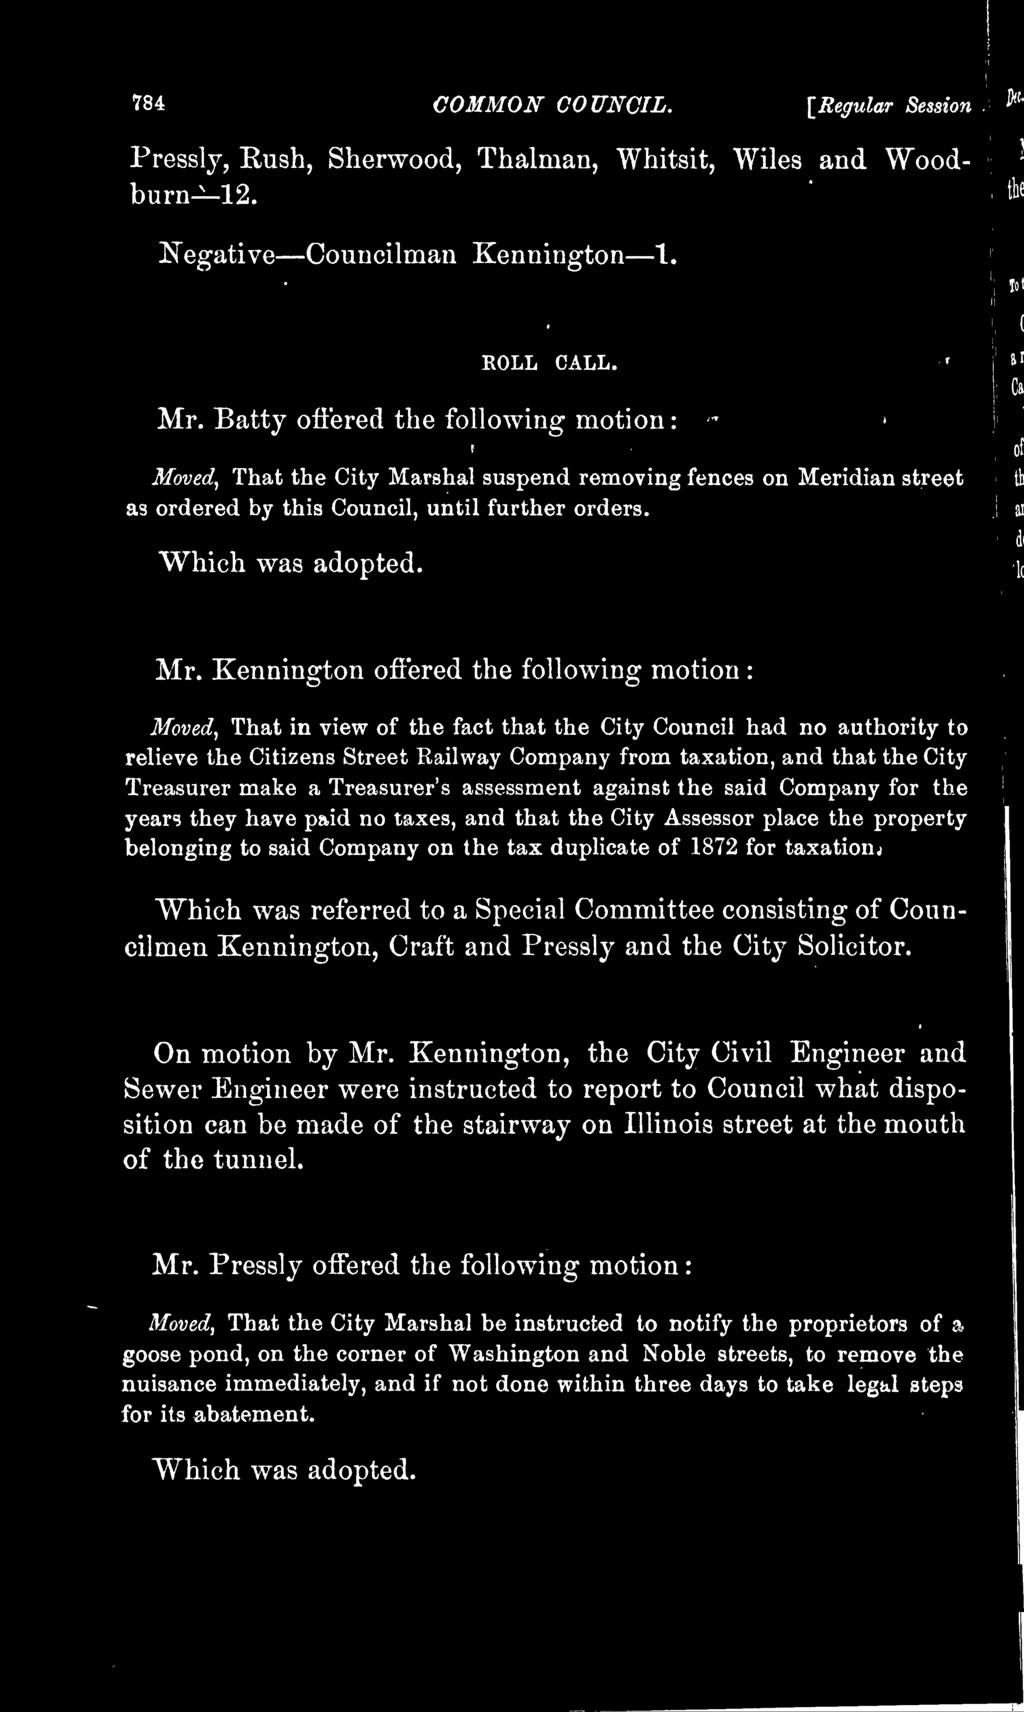 Kennington offered the following motion Moved, That in view of the fact that the City Council had no authority to relieve the Citizens Street Railway Company from taxation, and that the City